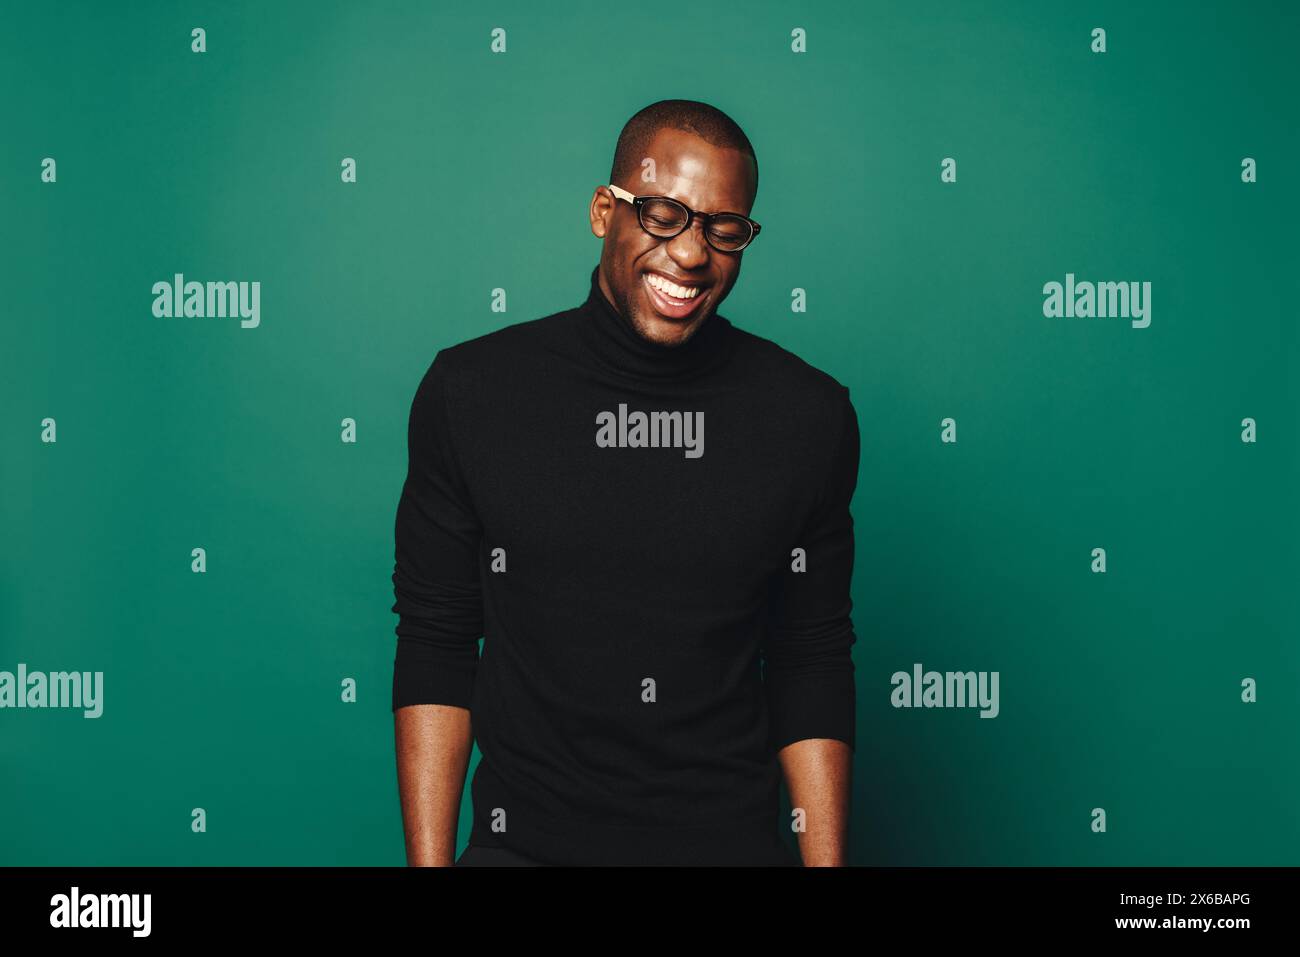 Young African man with a confident smile stands in a studio. He wears eyeglasses, and a casual black sweater, radiating happiness against a green back Stock Photo